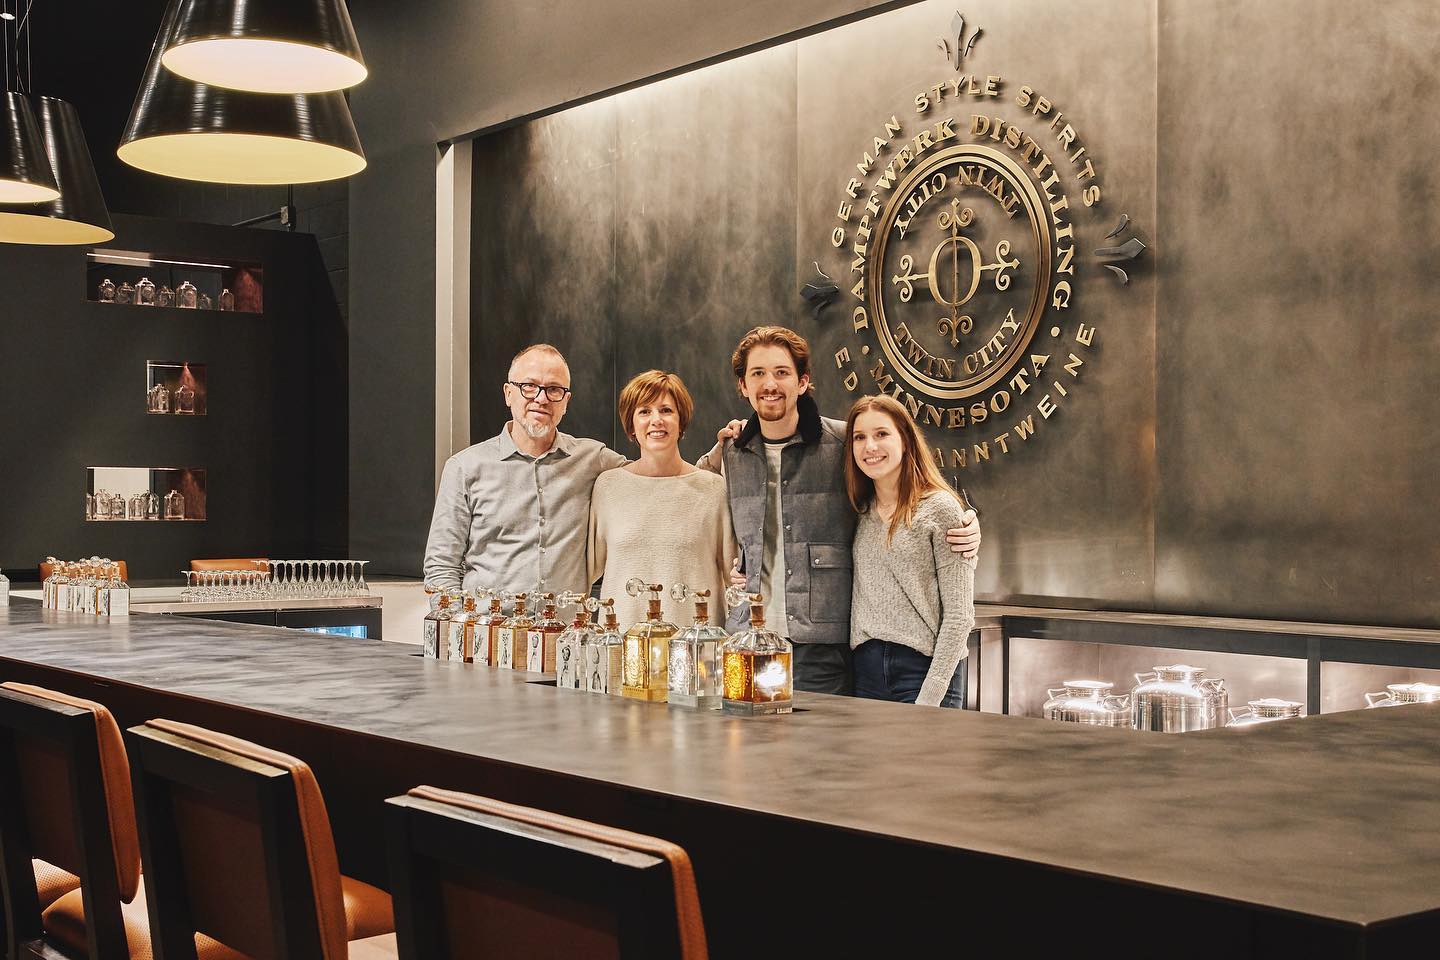 the owner's family behind the bar